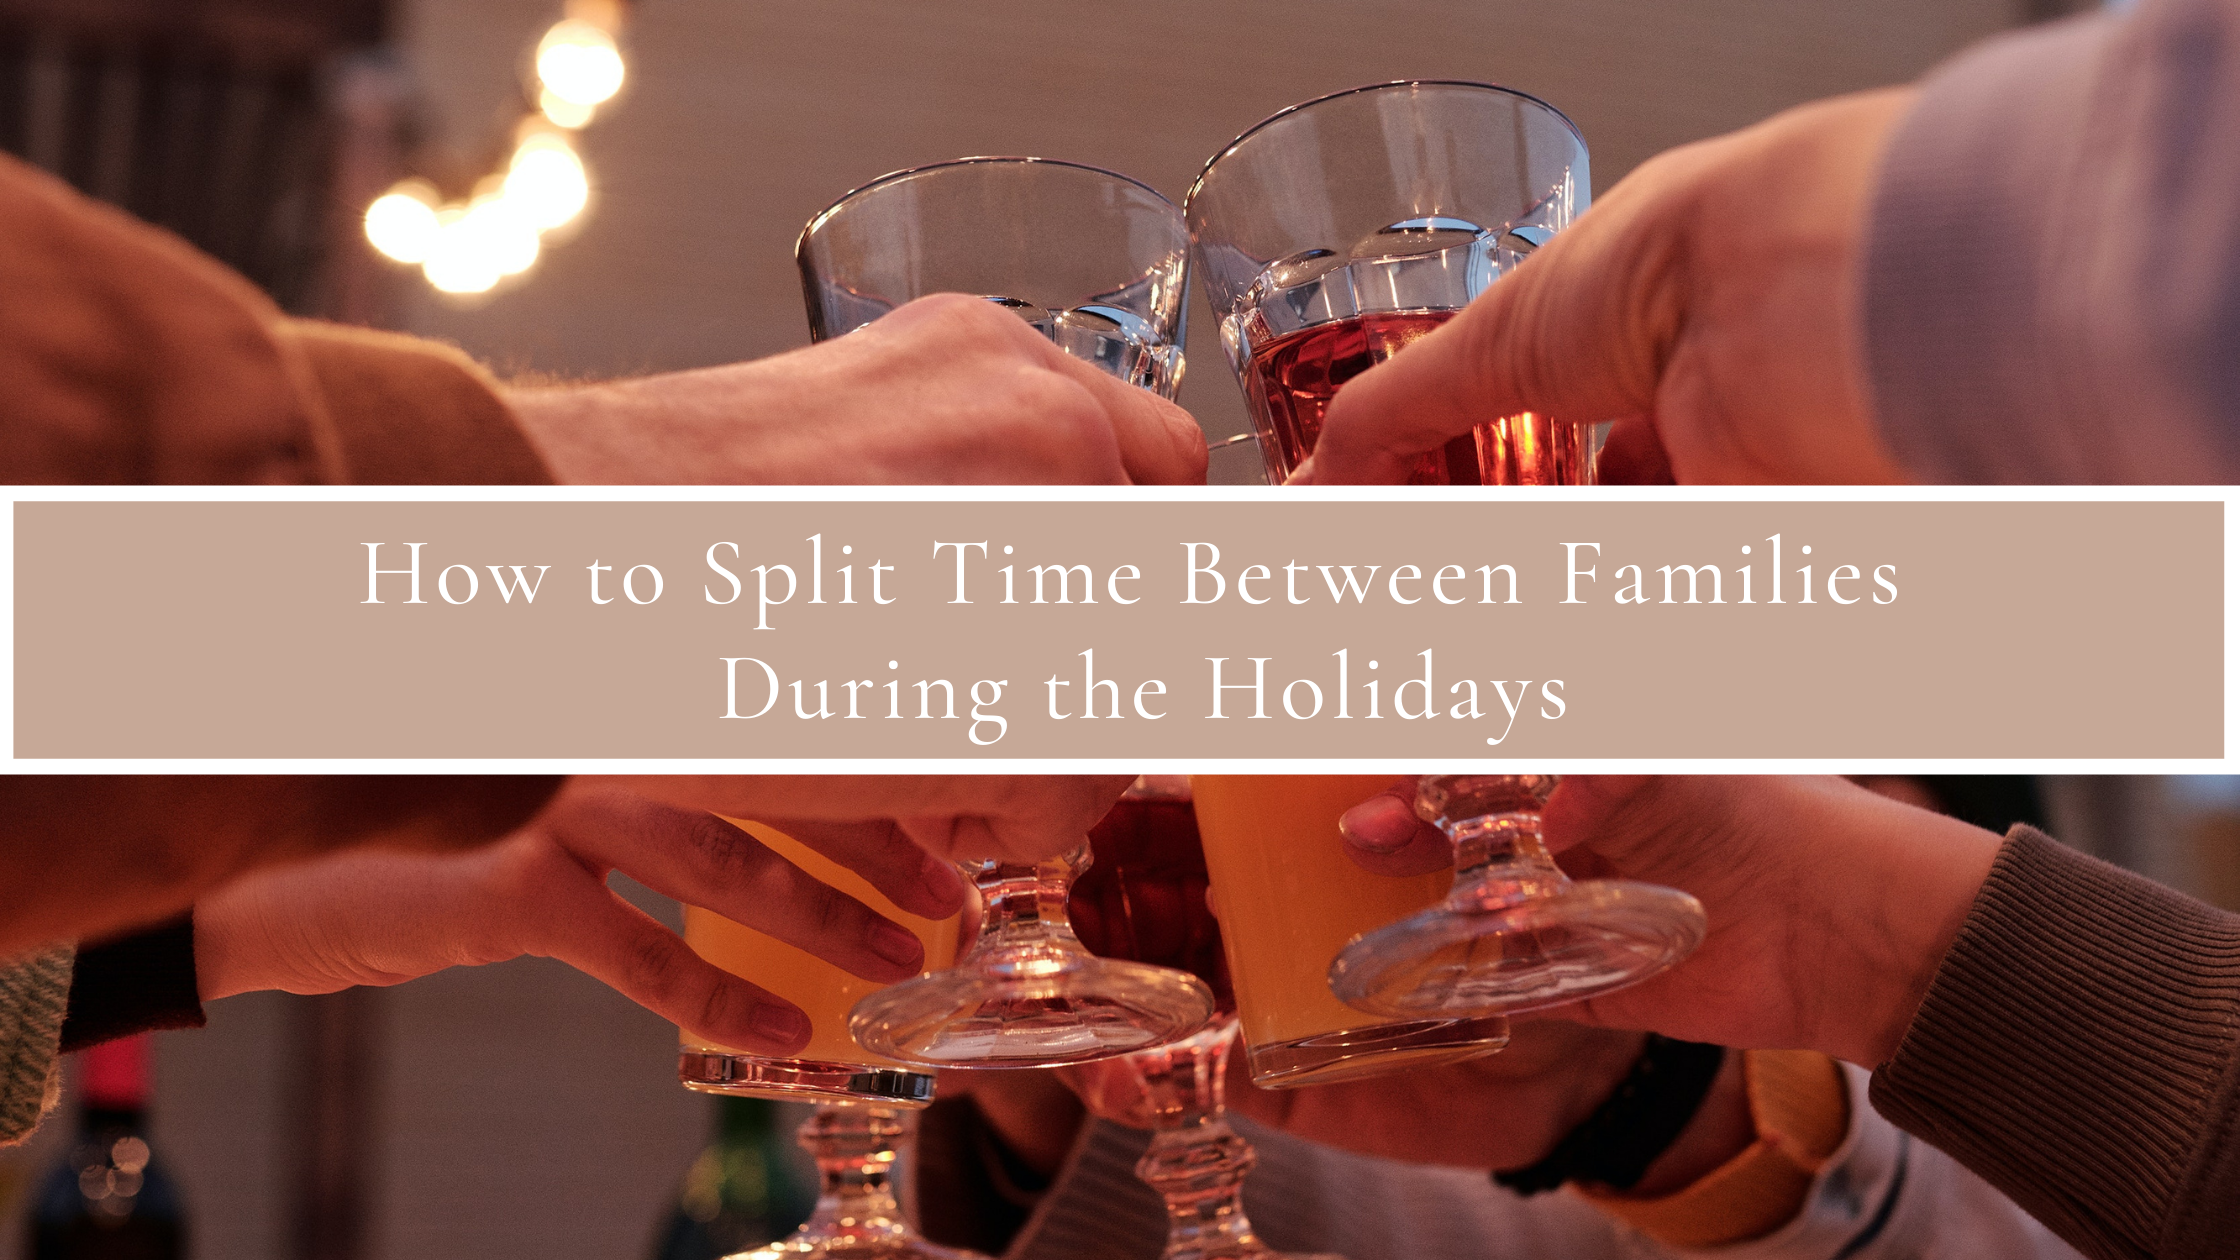 How to Split Time Between Families During the Holidays